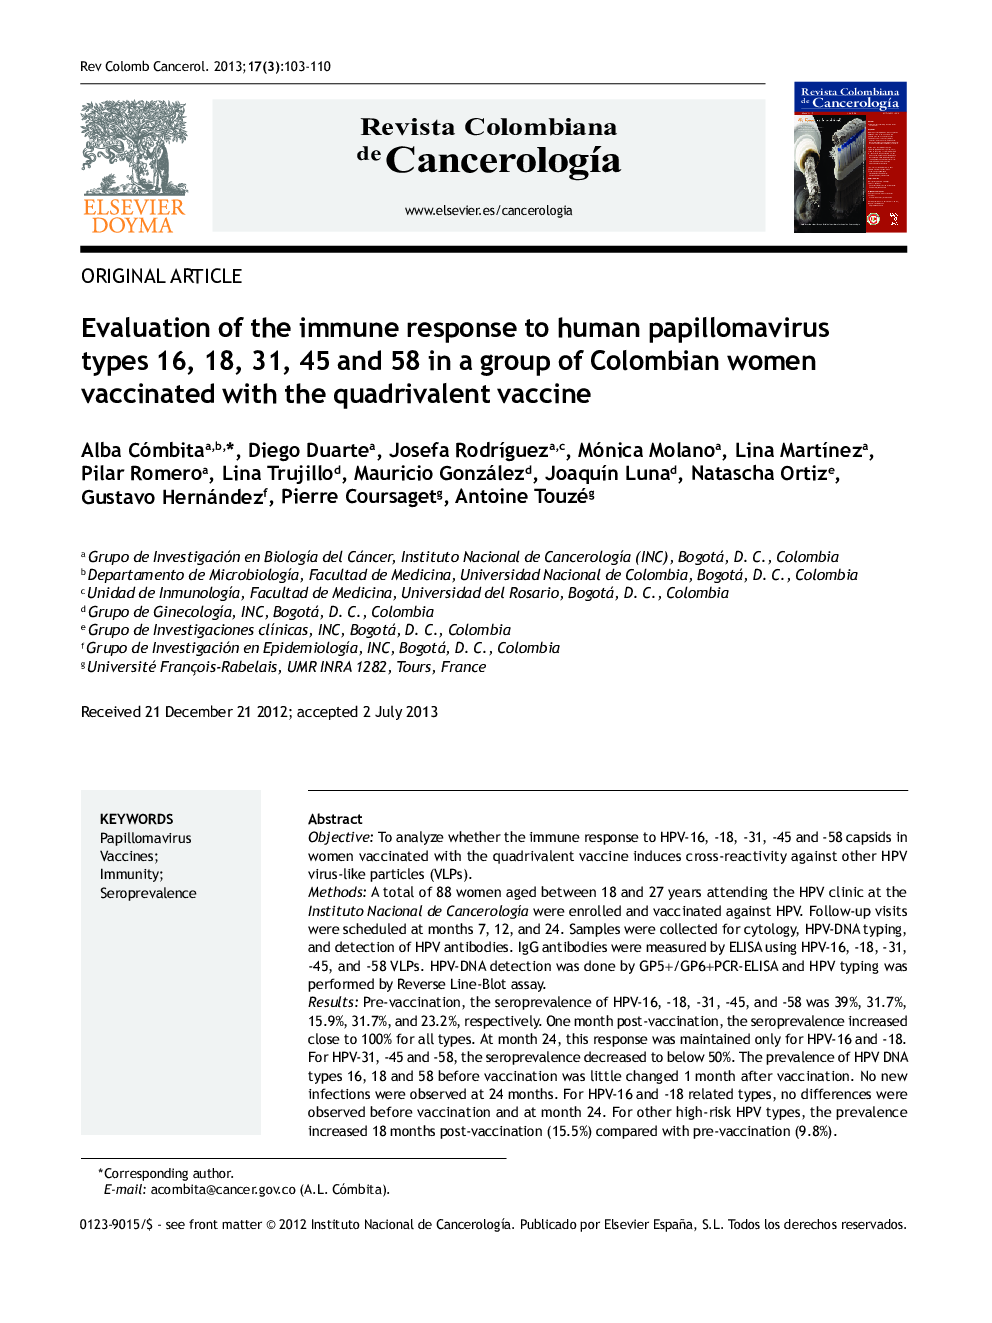 Evaluation of the immune response to human papillomavirus types 16, 18, 31, 45 and 58 in a group of Colombian women vaccinated with the quadrivalent vaccine